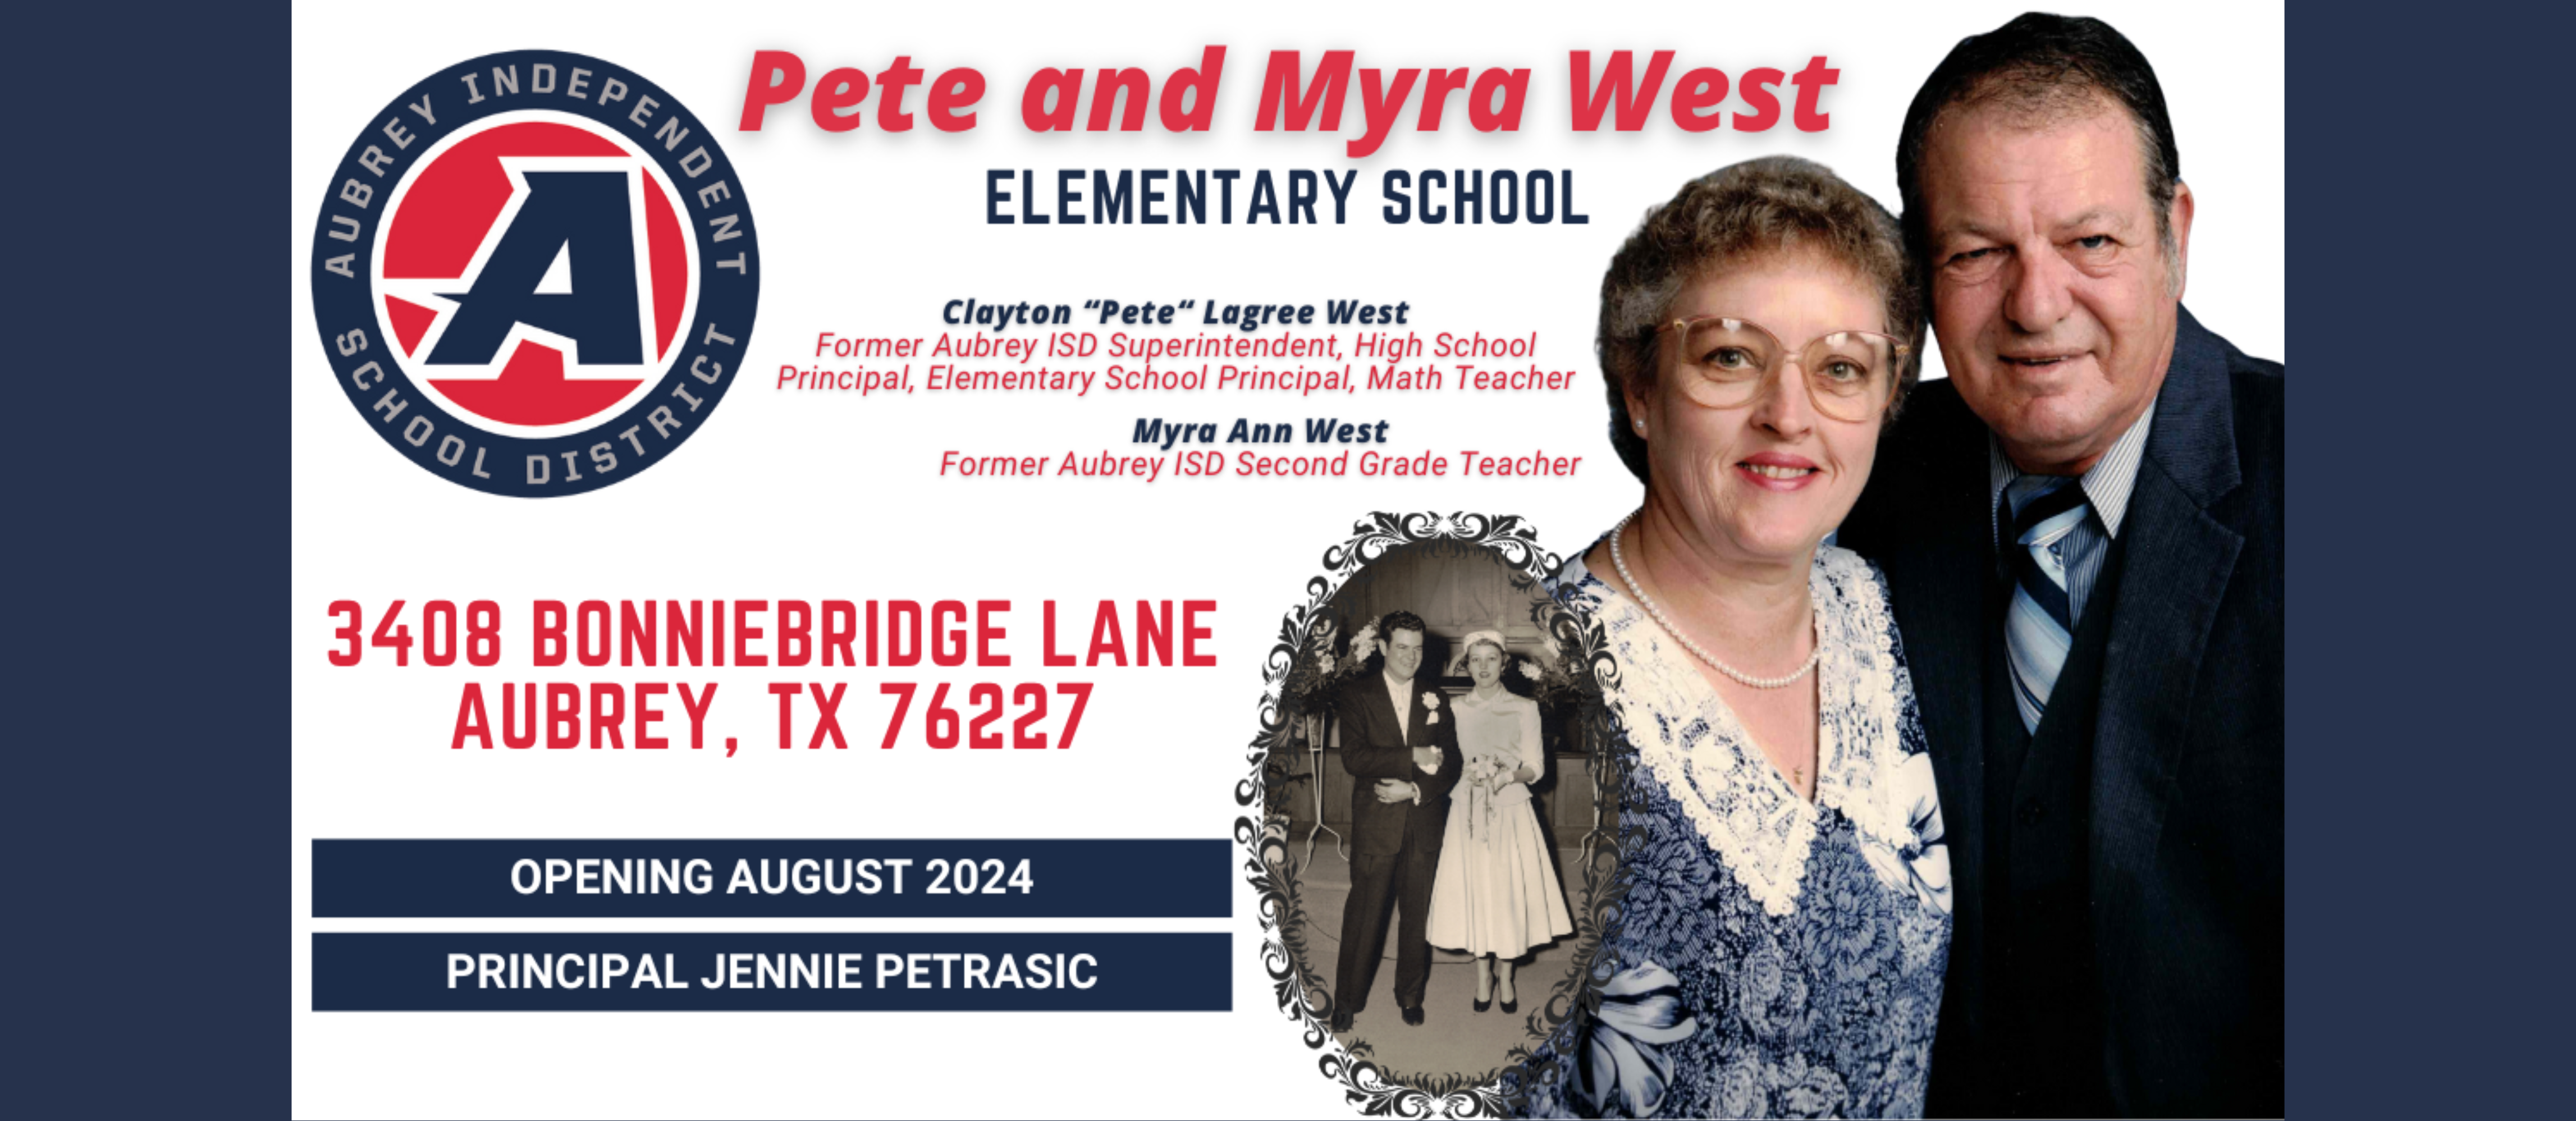 Pete and Myra West Elementary School promotional graphic with photos of namesakes